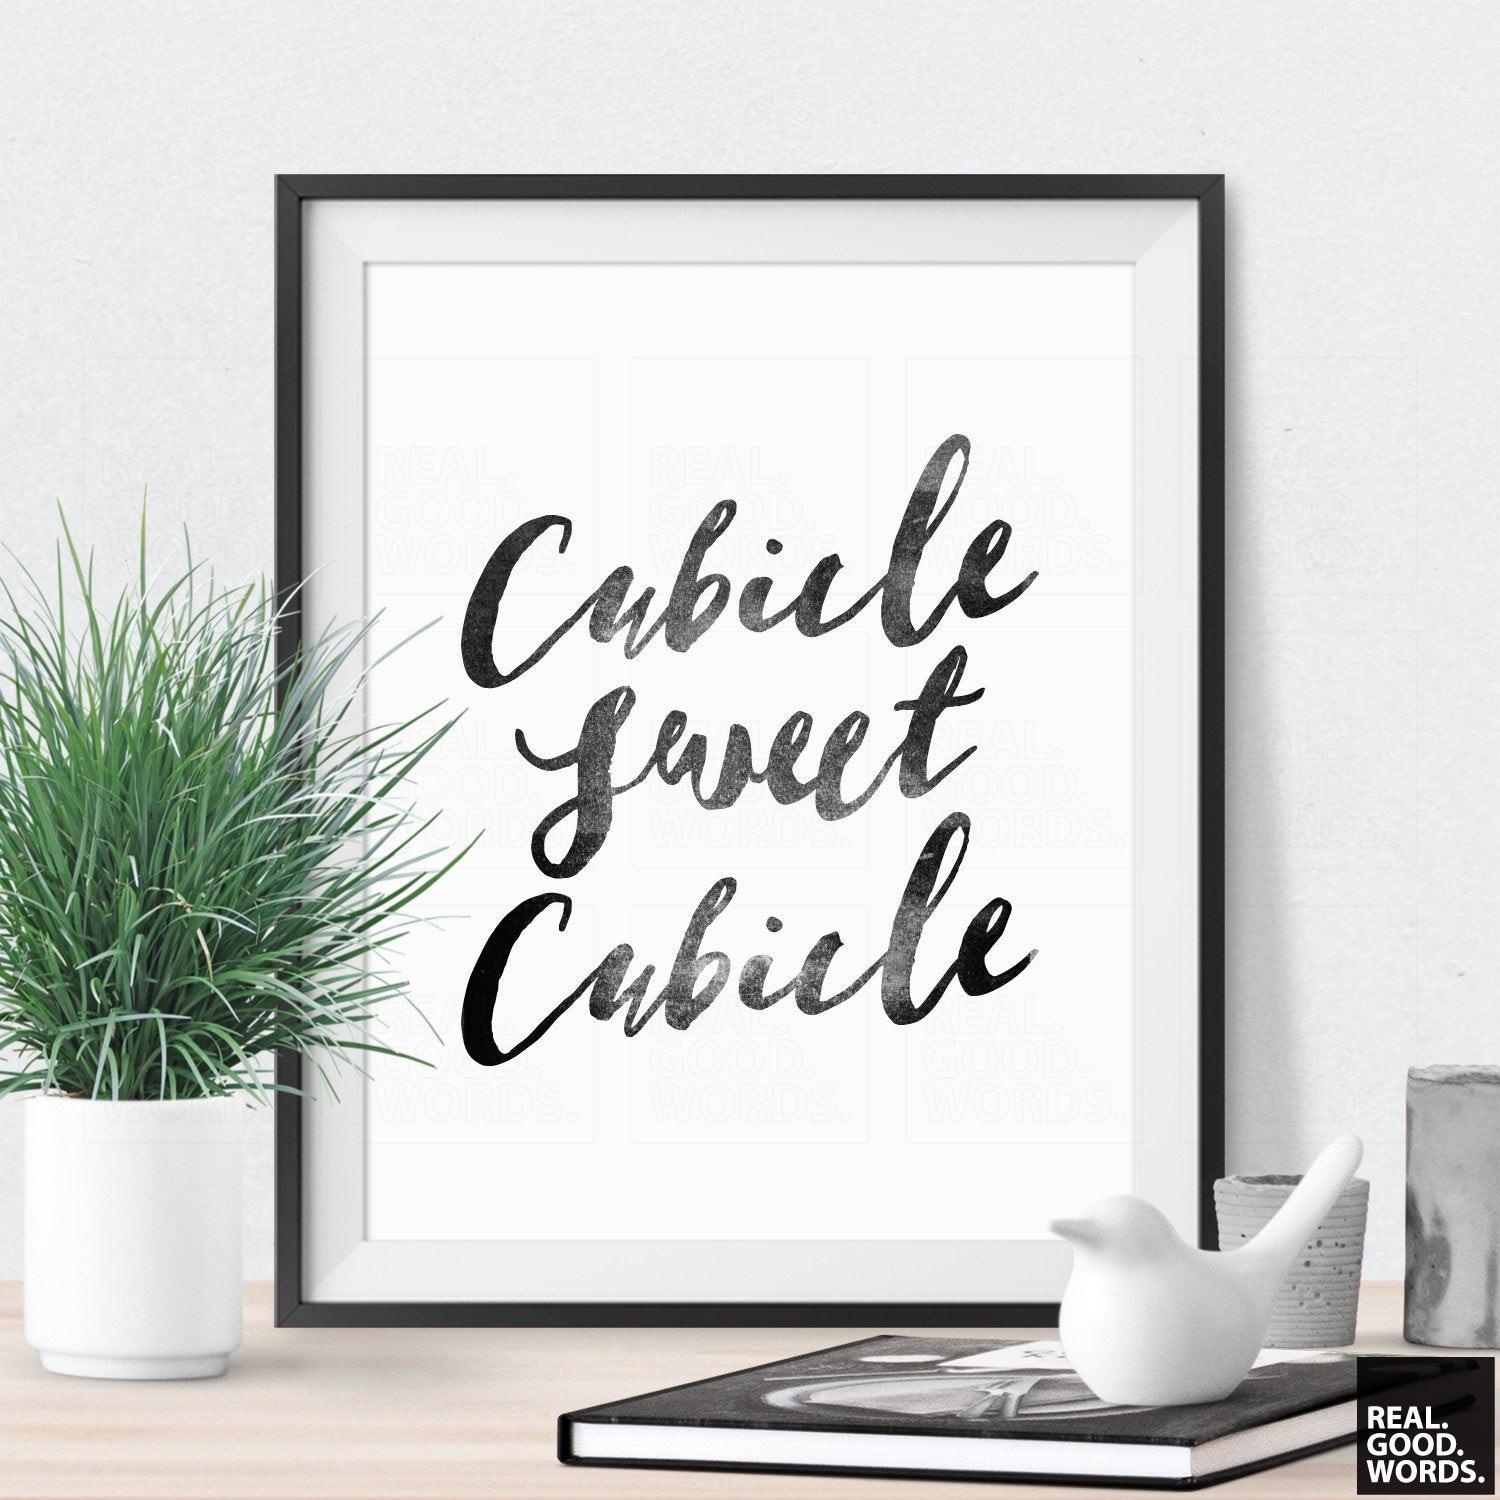 Best ideas about Office Wall Decor
. Save or Pin Cubicle Decor Cubicle Sweet Cubicle fice Wall Decor fice Now.